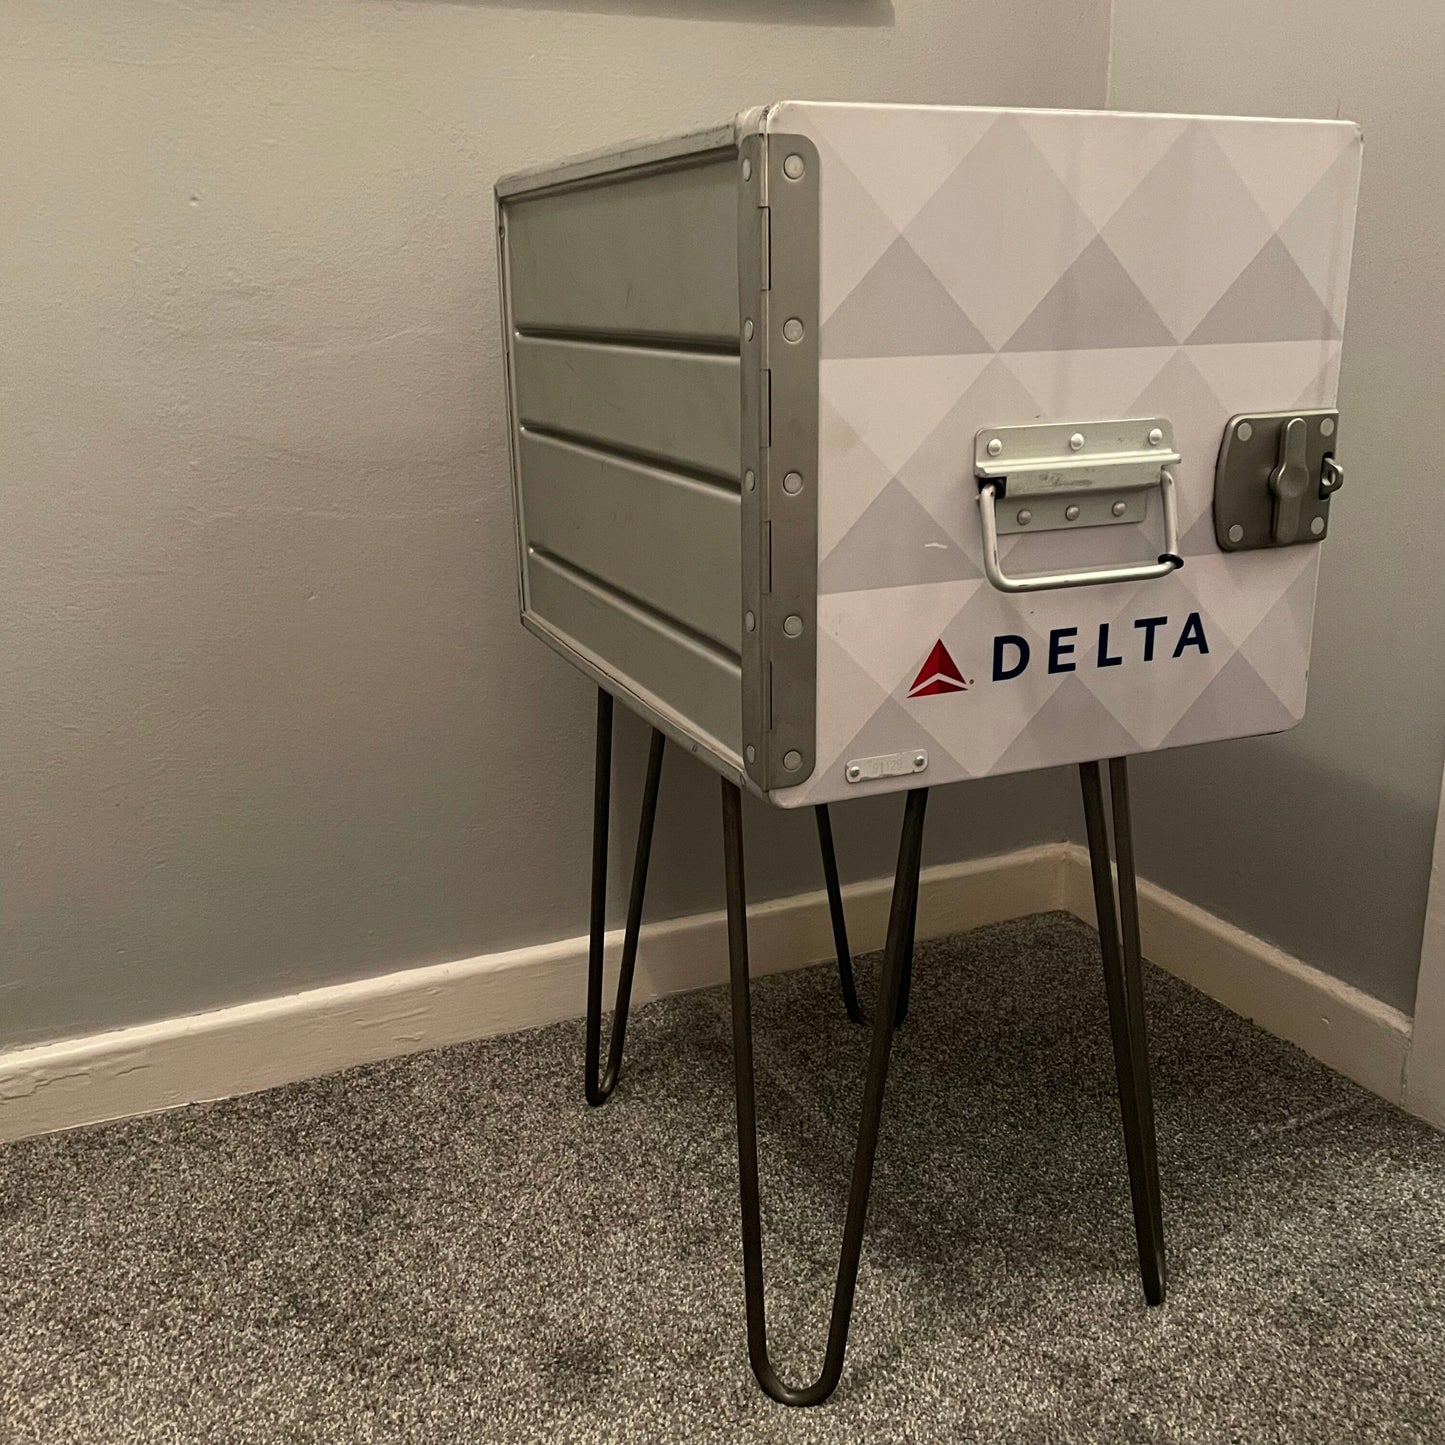 Delta American Airlines Galley Box Airline Plane Box Atlas Storage Side Table Handmade